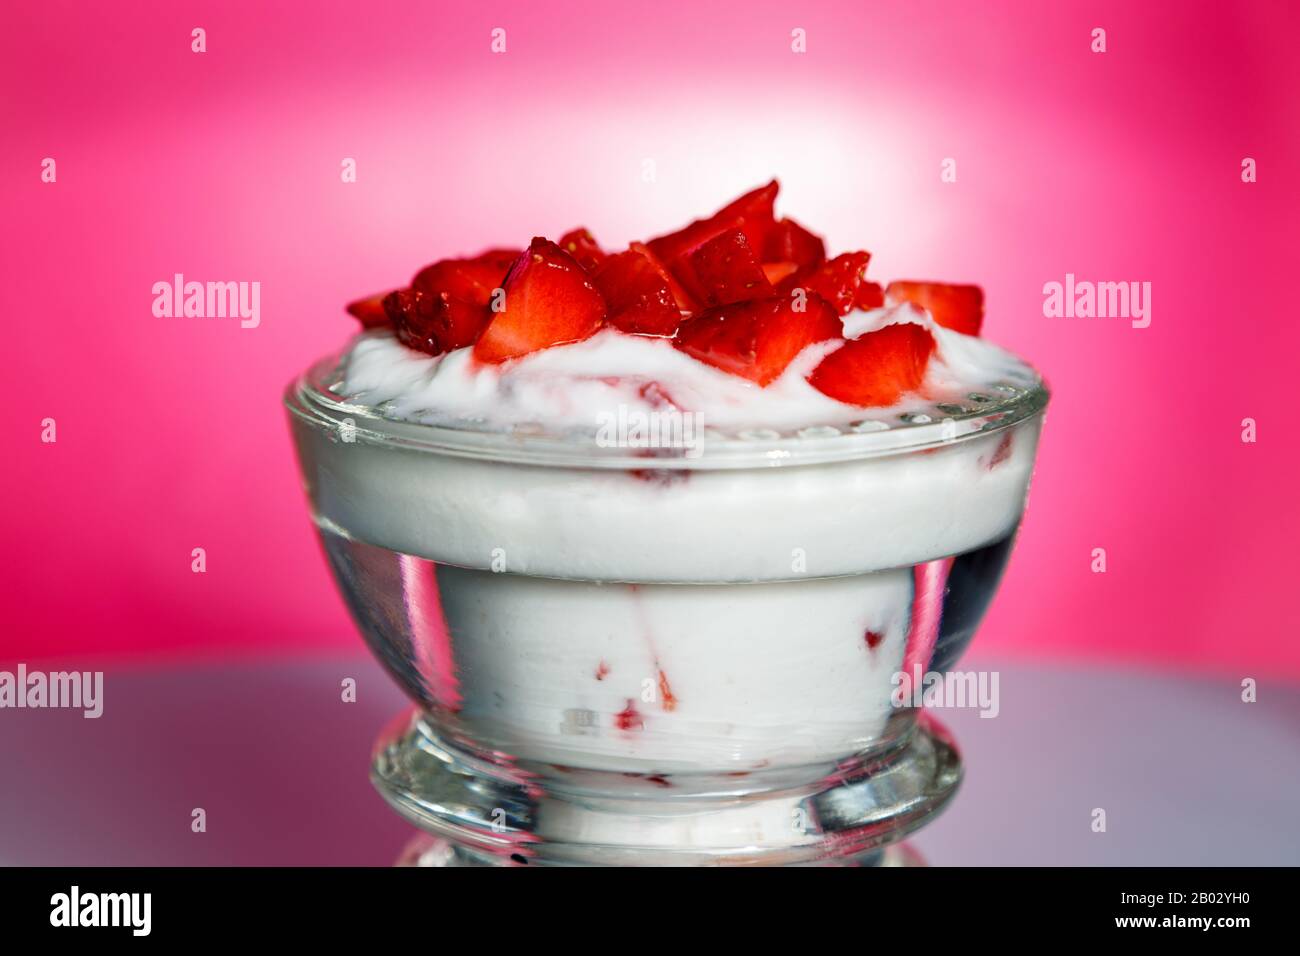 Ready-to-eat strawberry yogurt in a crystal glass on a pink background Stock Photo